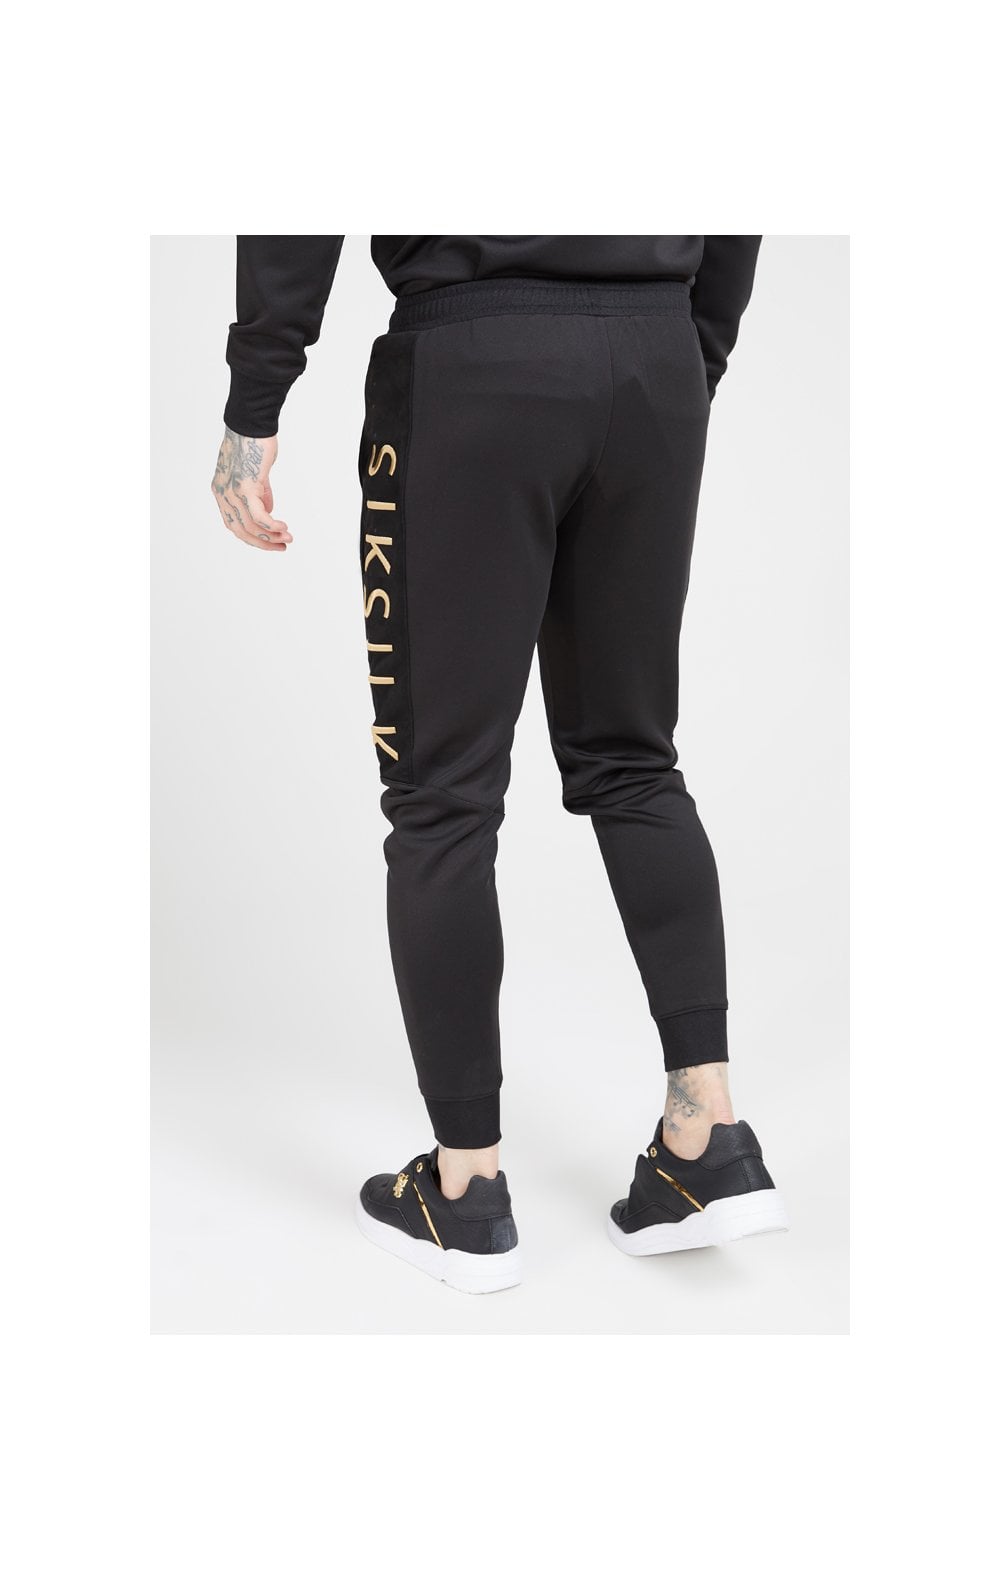 SikSilk Fitted Panel Cuff Pants – Black & Gold (2)